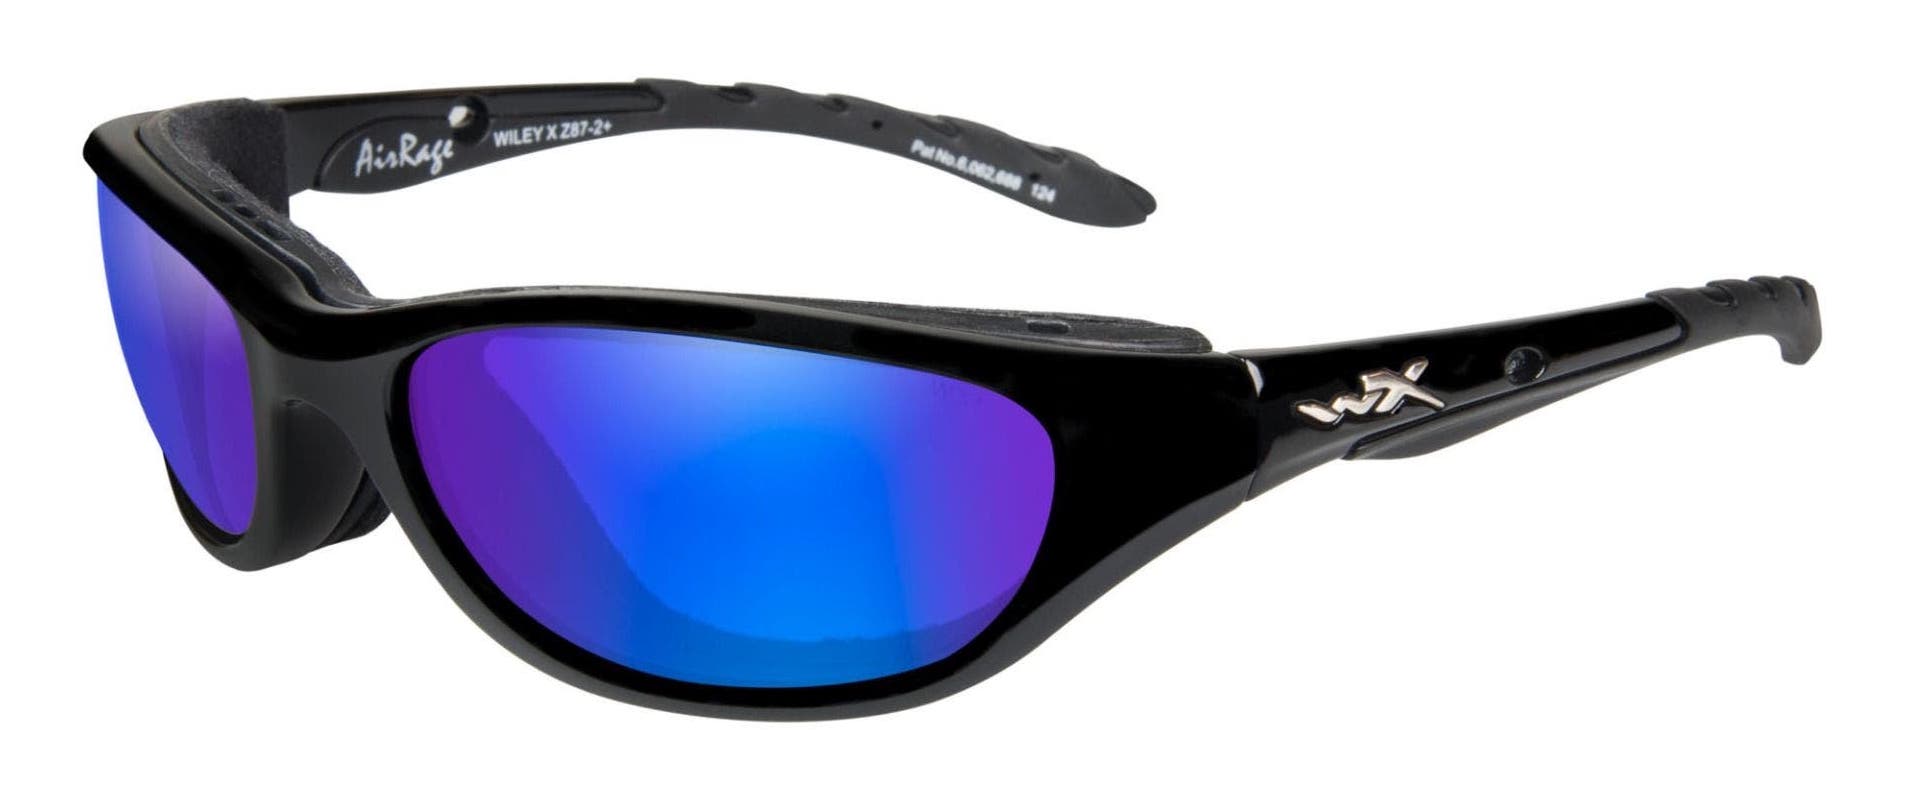 Wiley X Airrage sunglasses in glossy black frame with polarized blue mirror lenses.